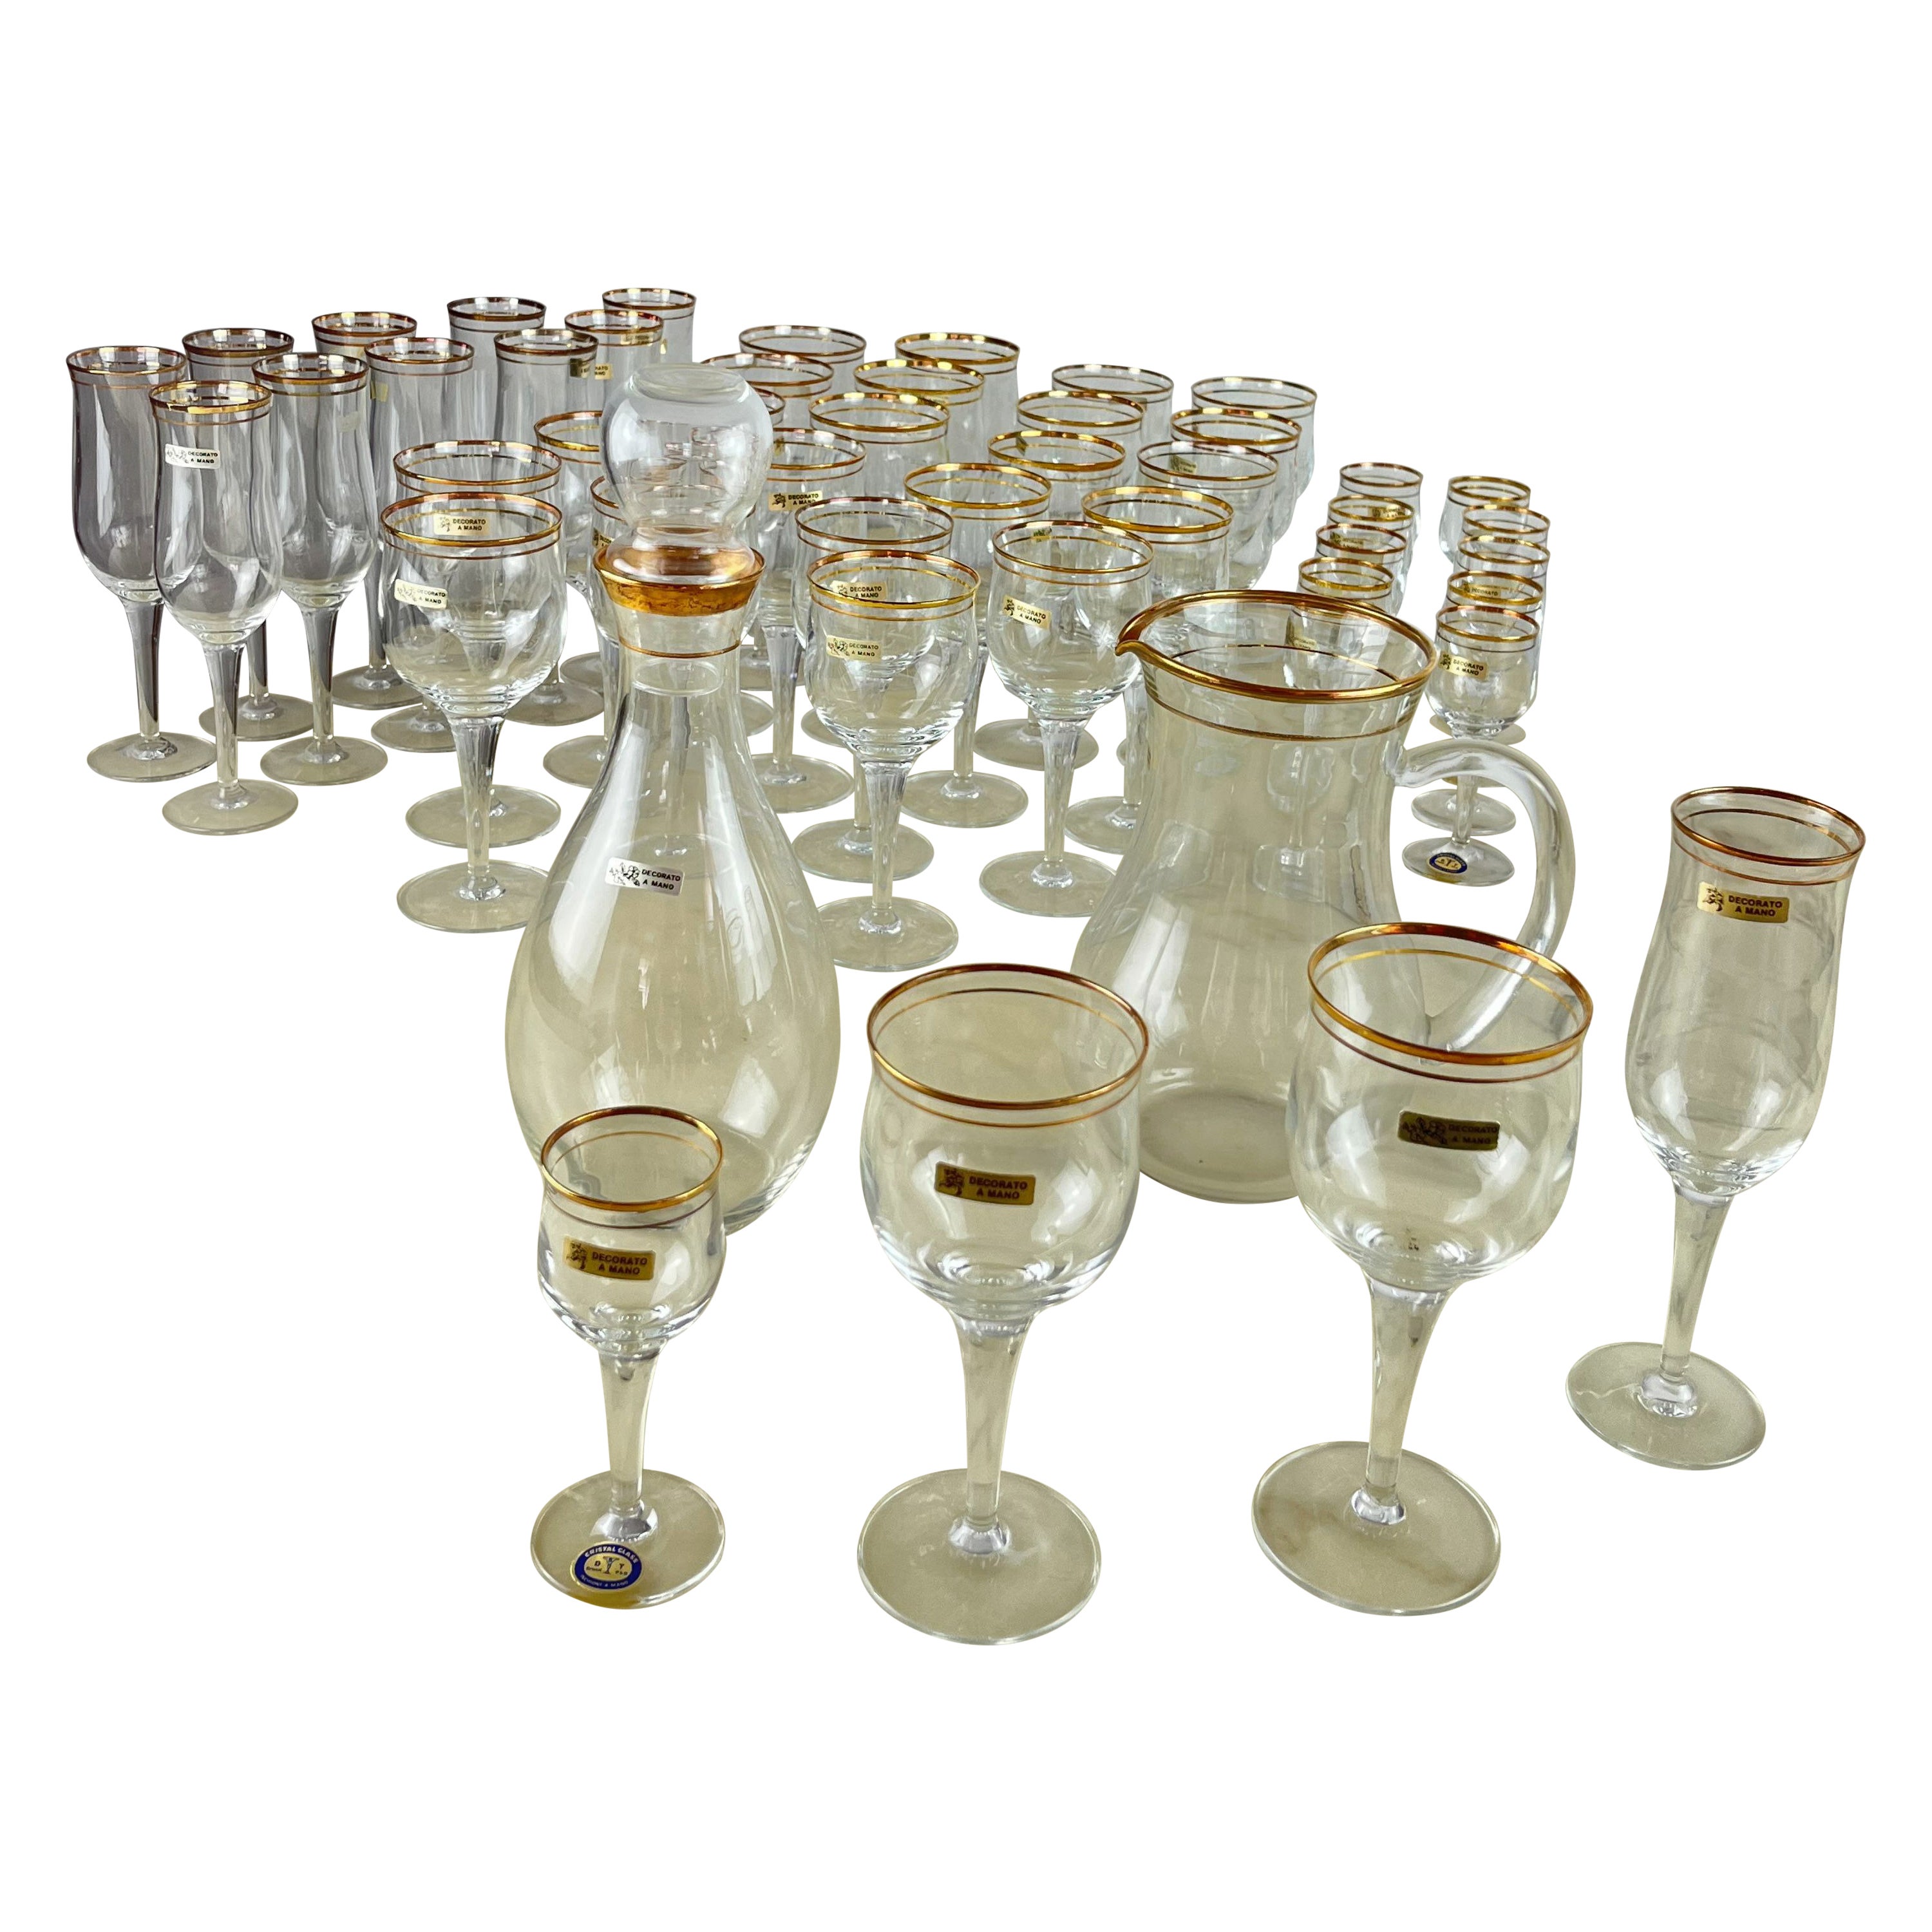 Hand-decorated crystal glass set, Italy, 1950s, 48 pieces